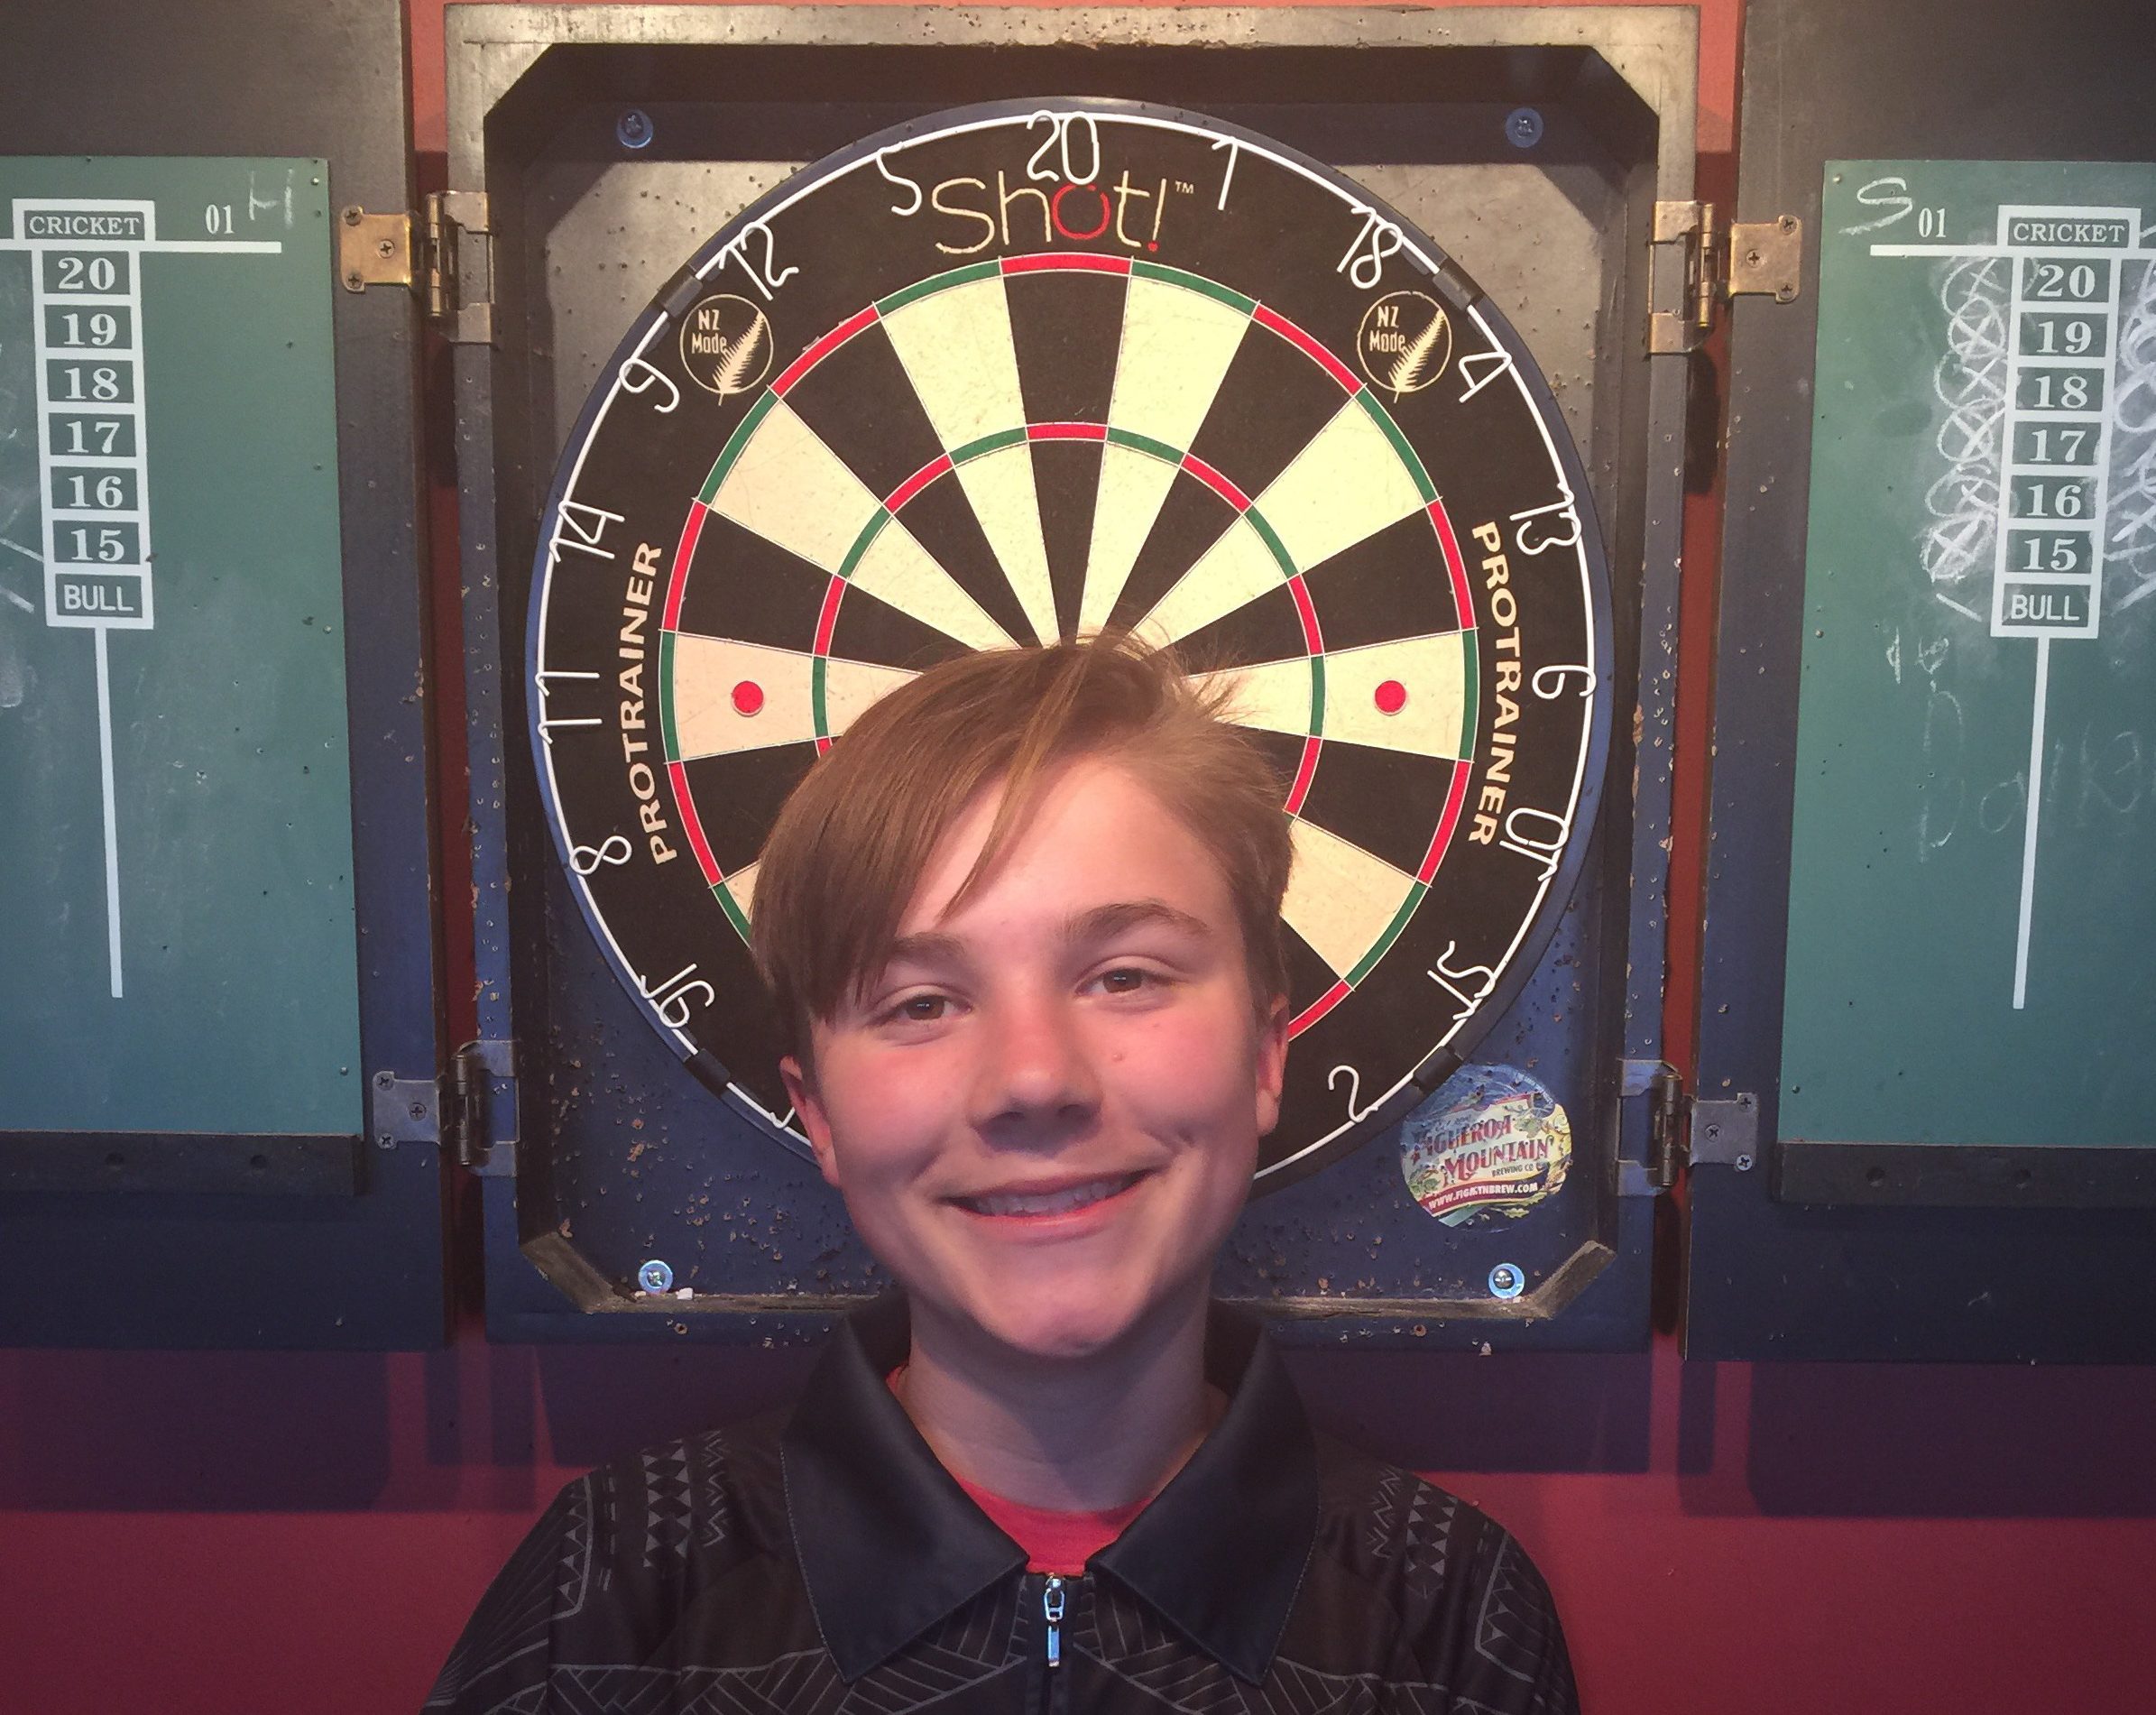 For Aidan O’Neill, throwing darts is fun but also serious business